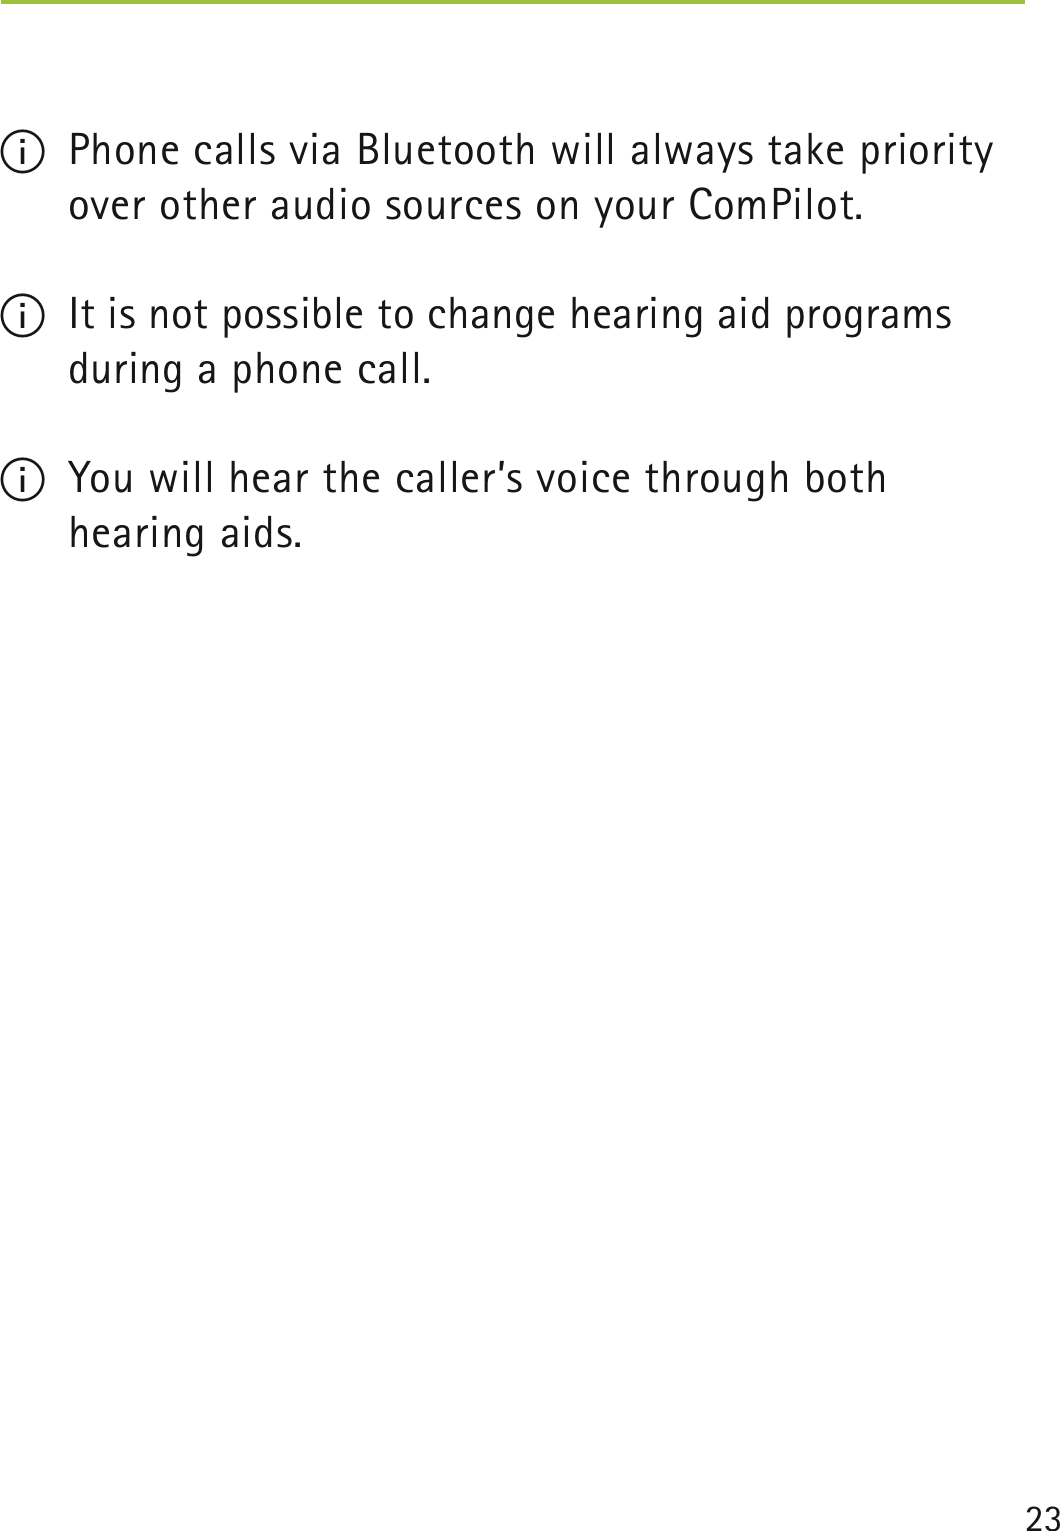 23 I  Phone calls via Bluetooth will always take priority over other audio sources on your ComPilot. I  It is not possible to change hearing aid programs during a phone call.I  You will hear the caller’s voice through both  hearing aids. 